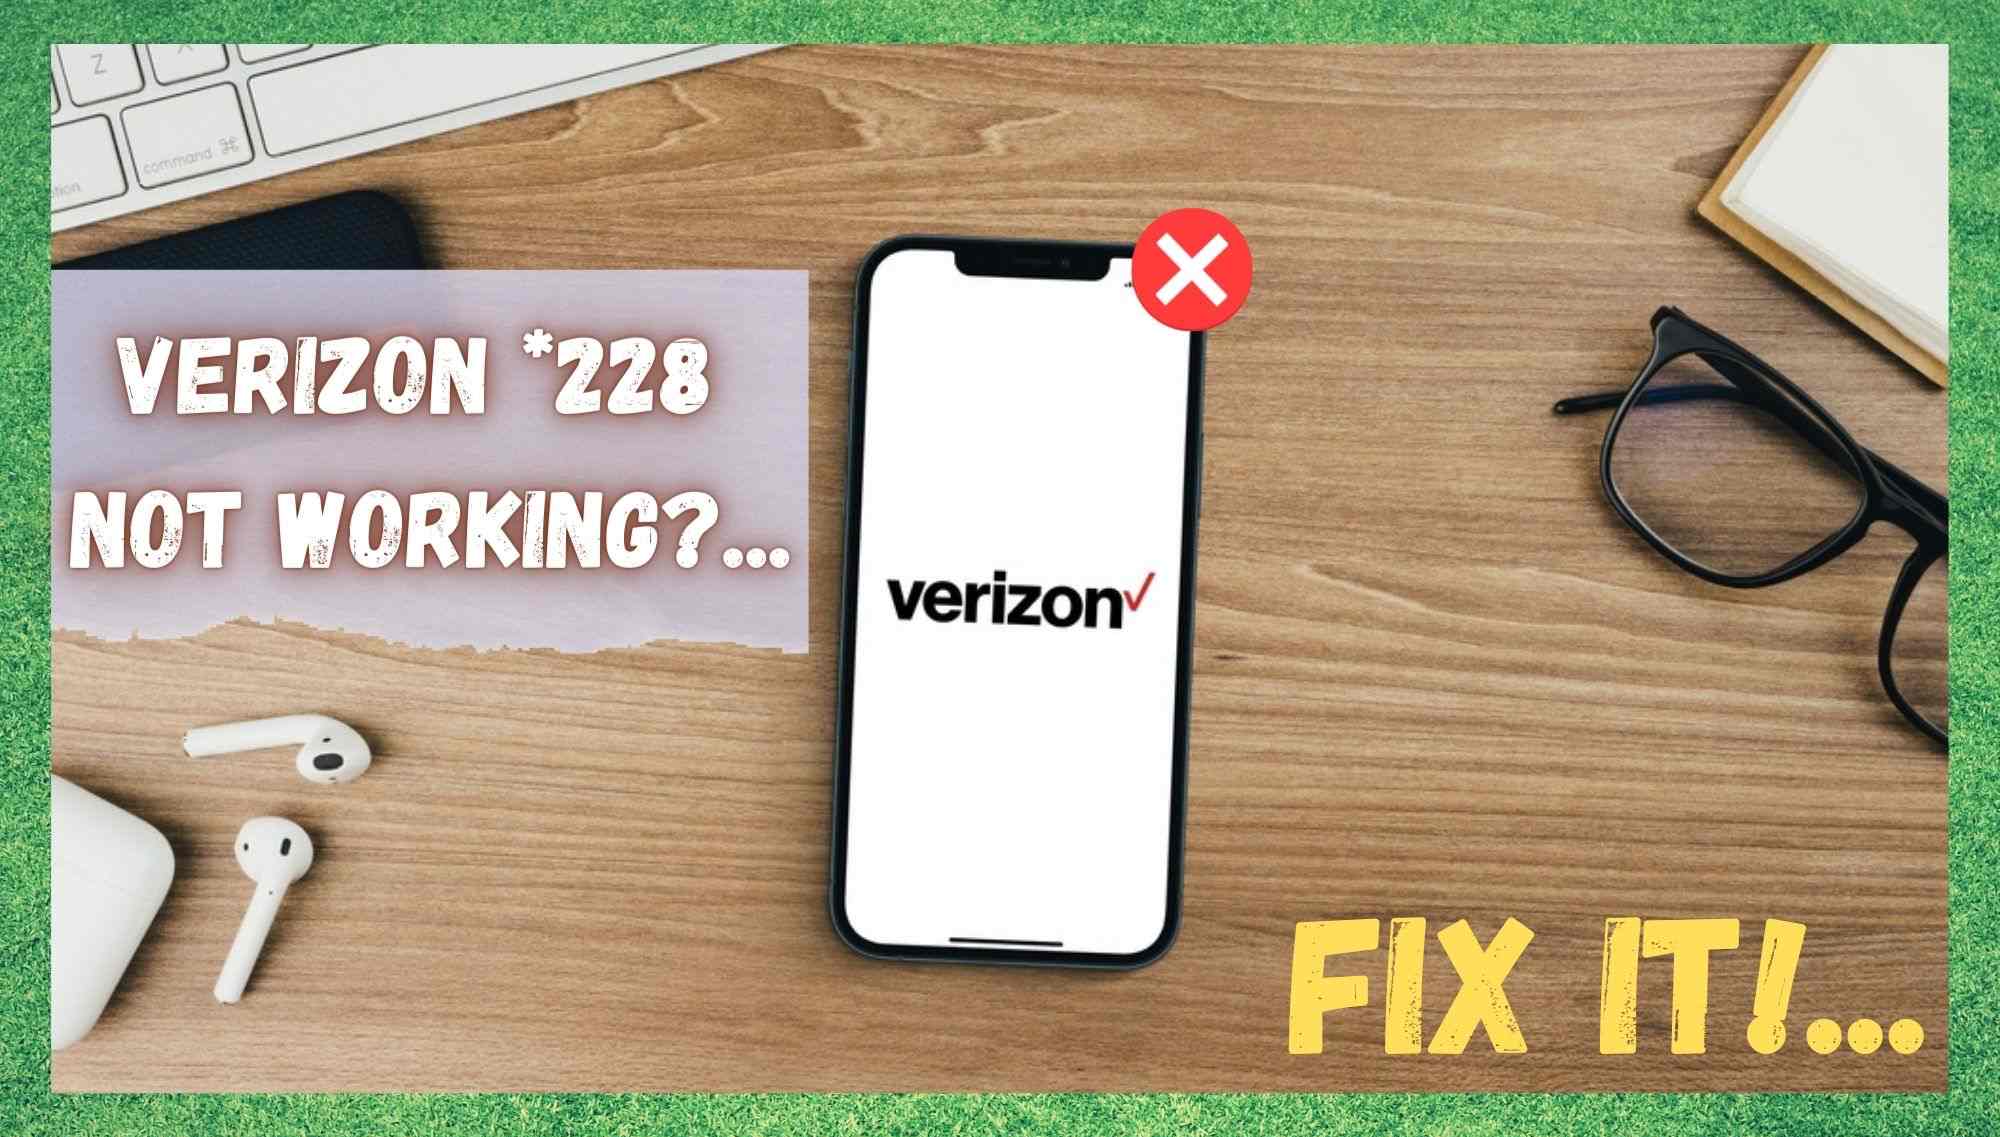 228 Not Allowed On Verizon: How To Troubleshoot In Second?